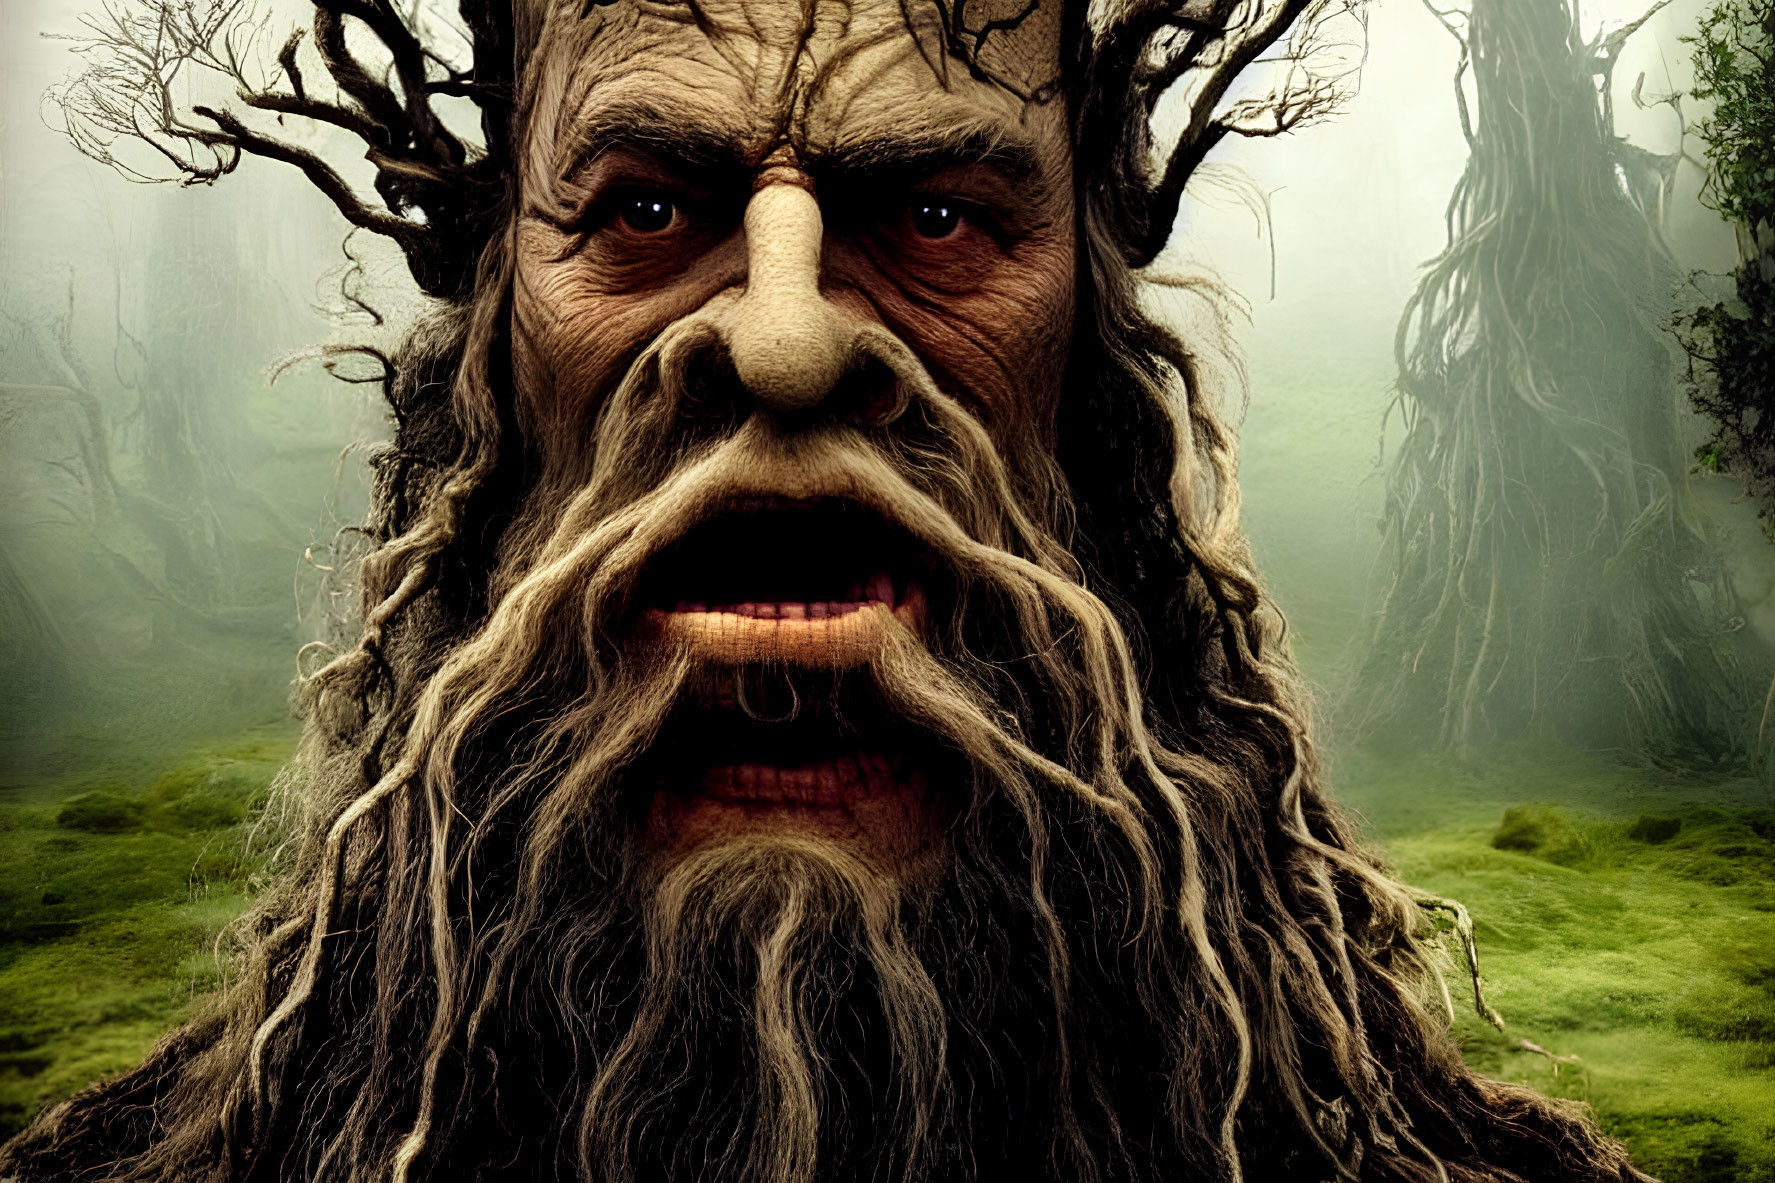 Tree-like creature with human face, intricate bark texture, and dense foliage in misty forest